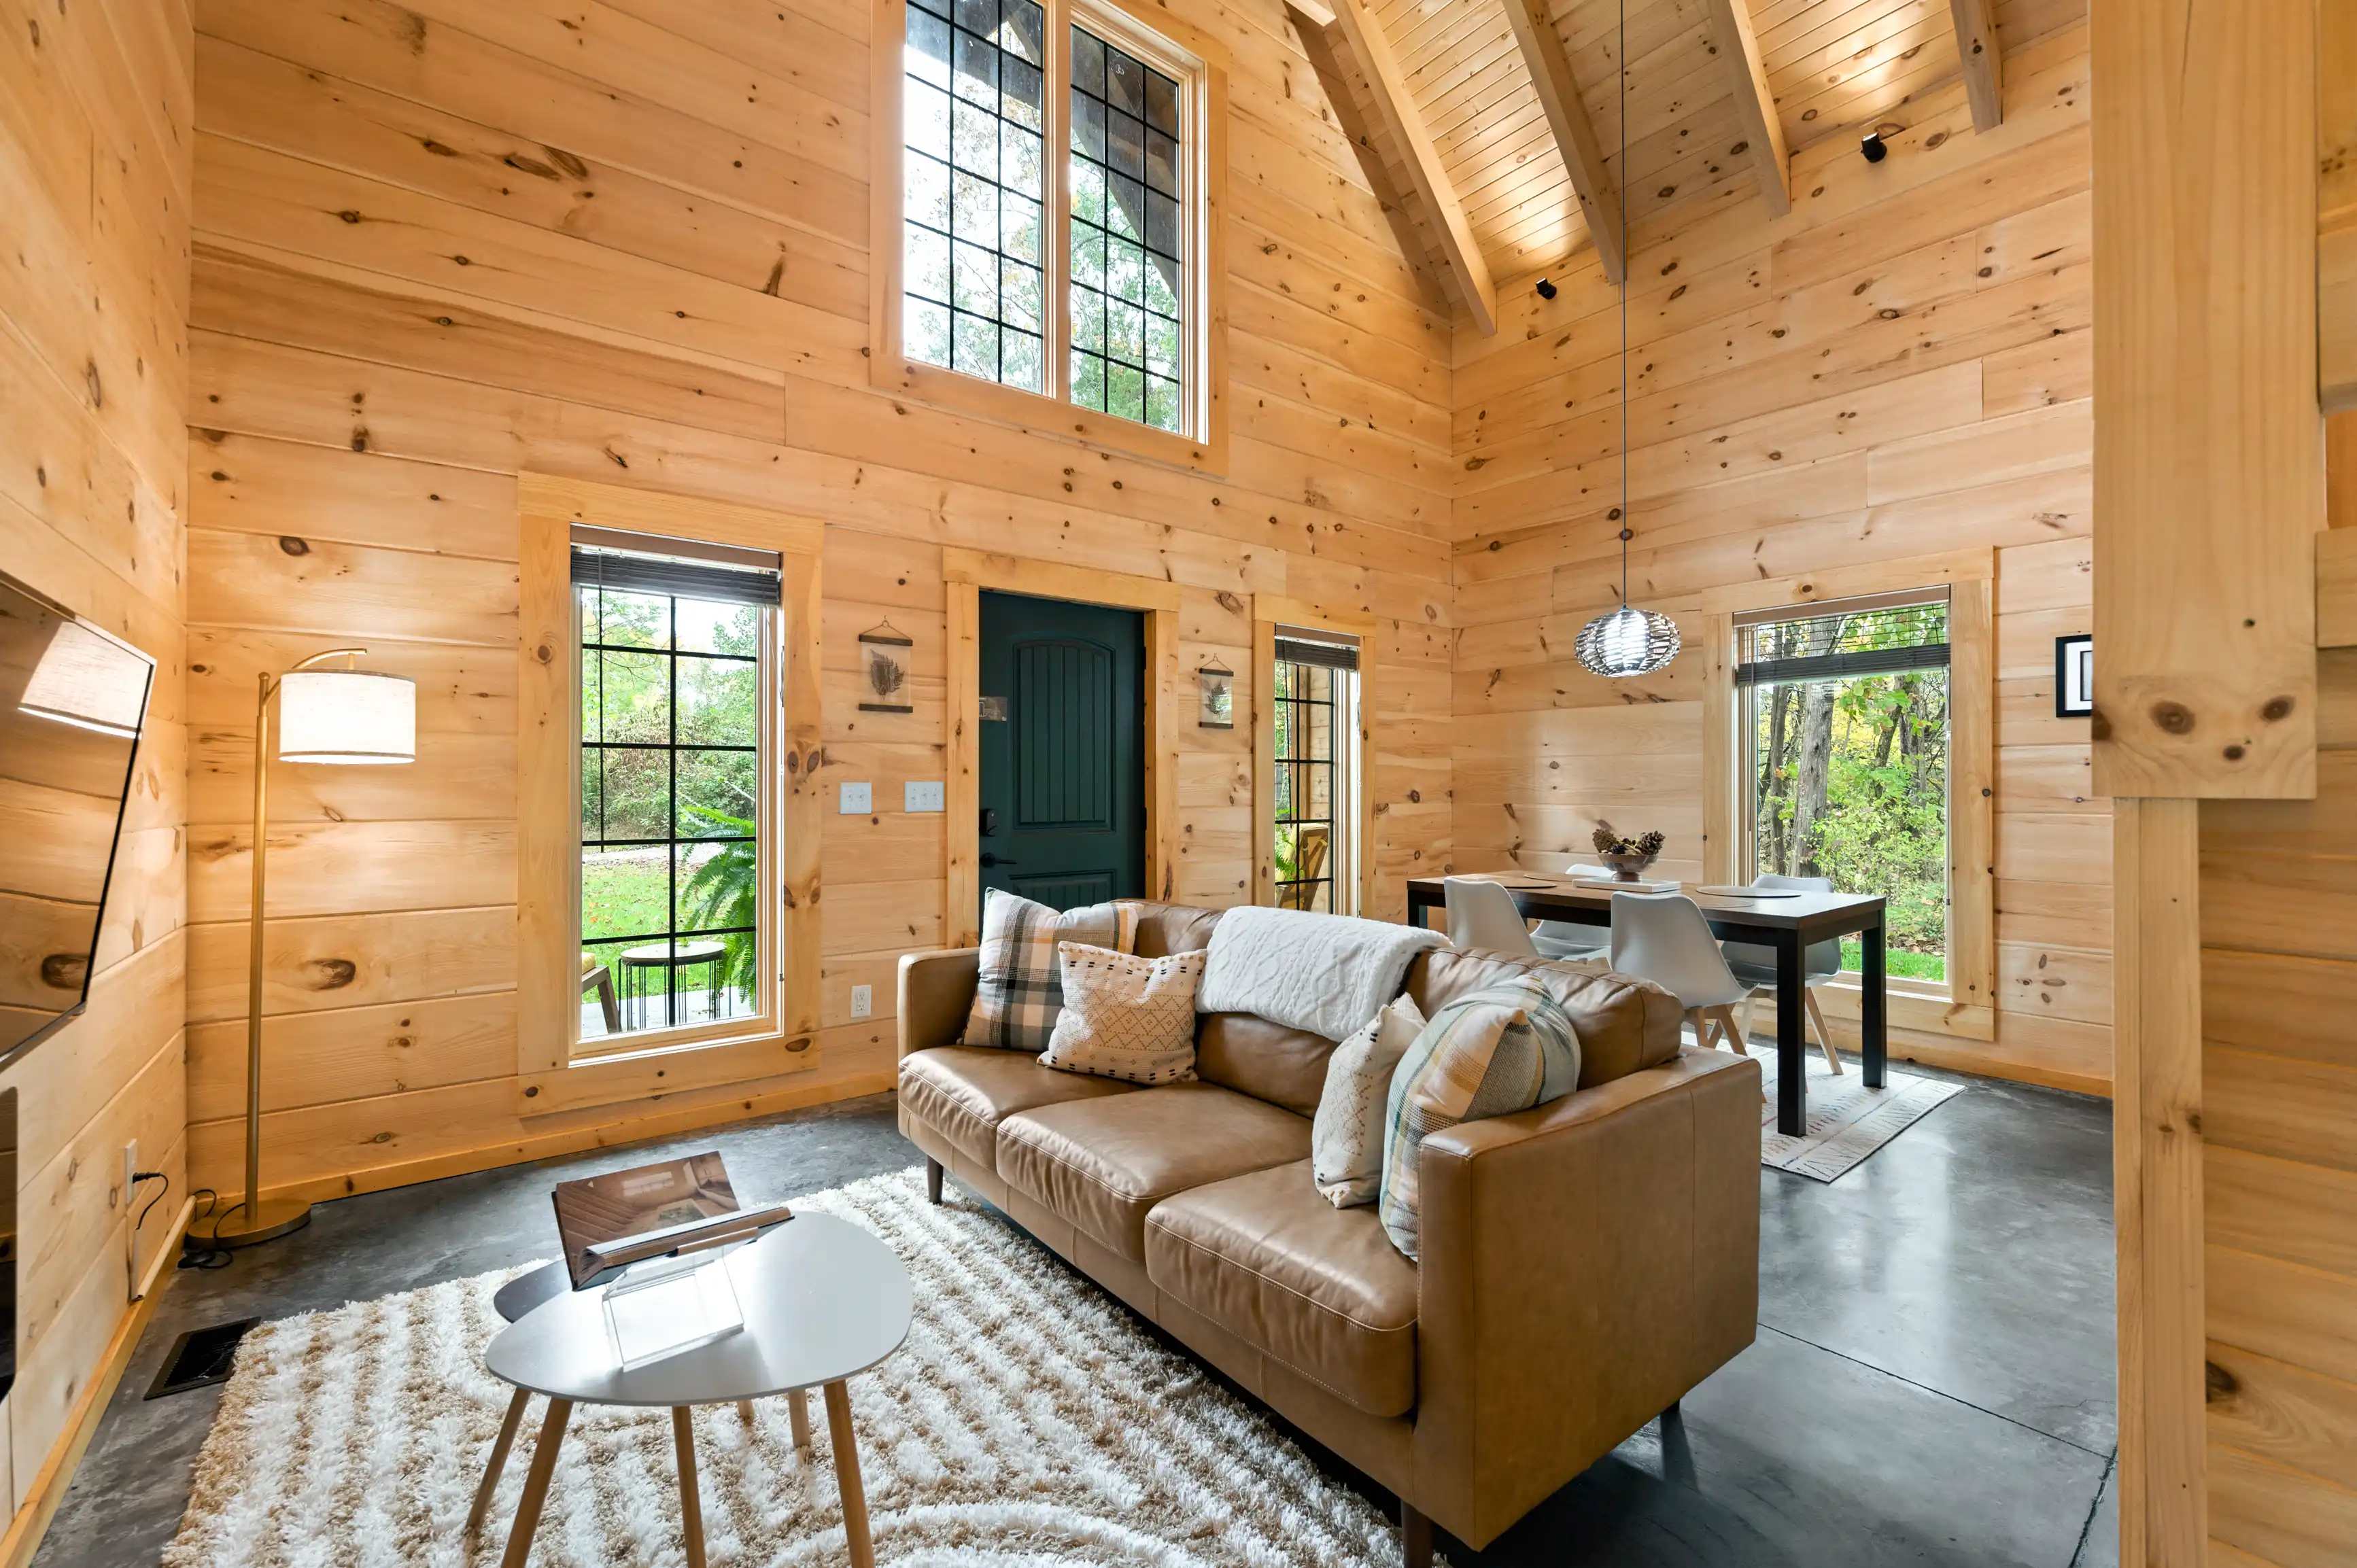 Cozy wooden cabin interior with vaulted ceiling, plush sofa, and modern furnishings.